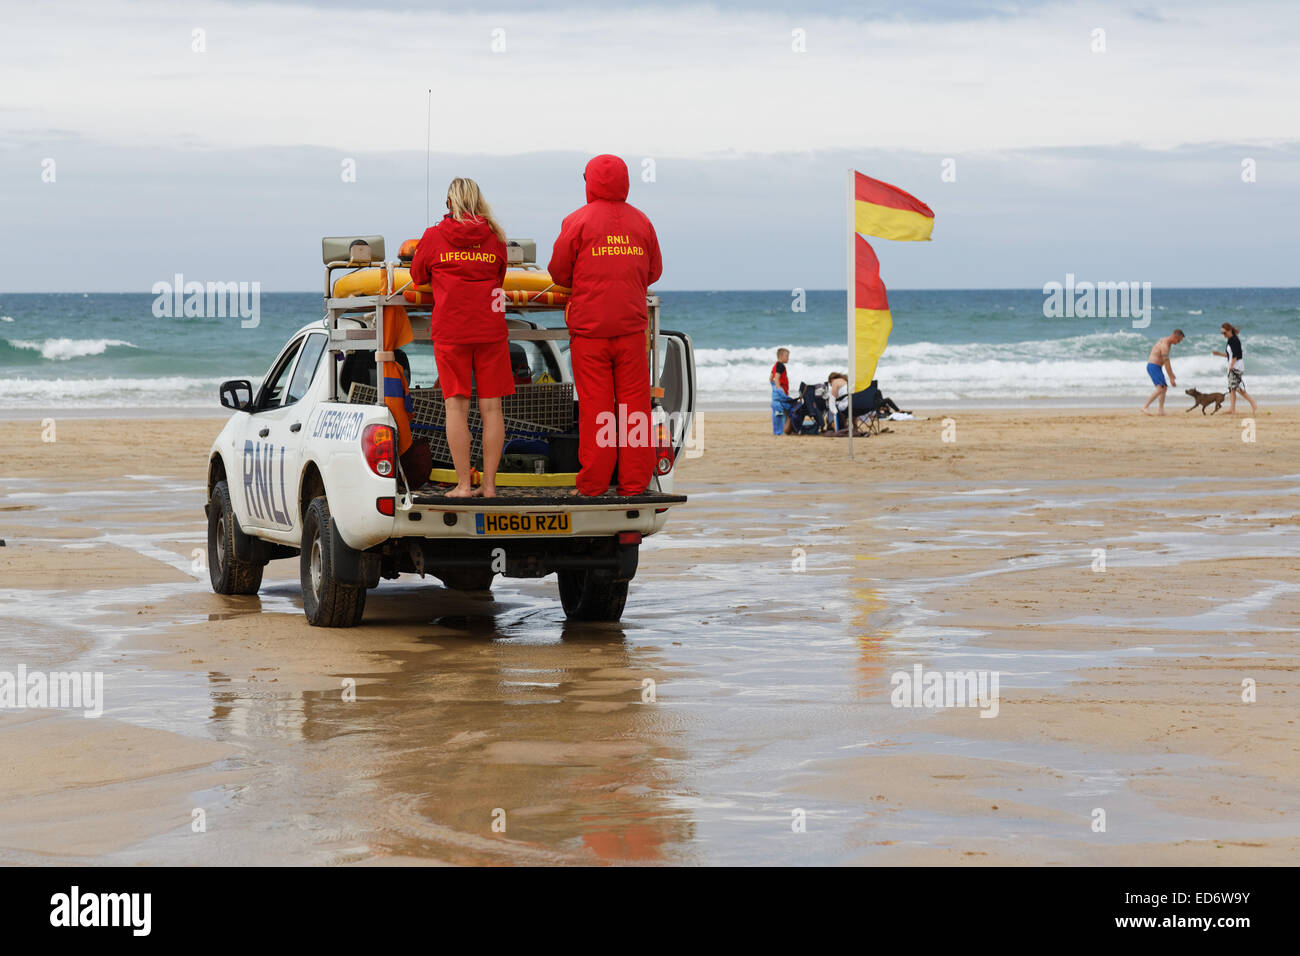 Life guards at fistral beach on a windy day in Newquay, Cornwall, UK. Stock Photo